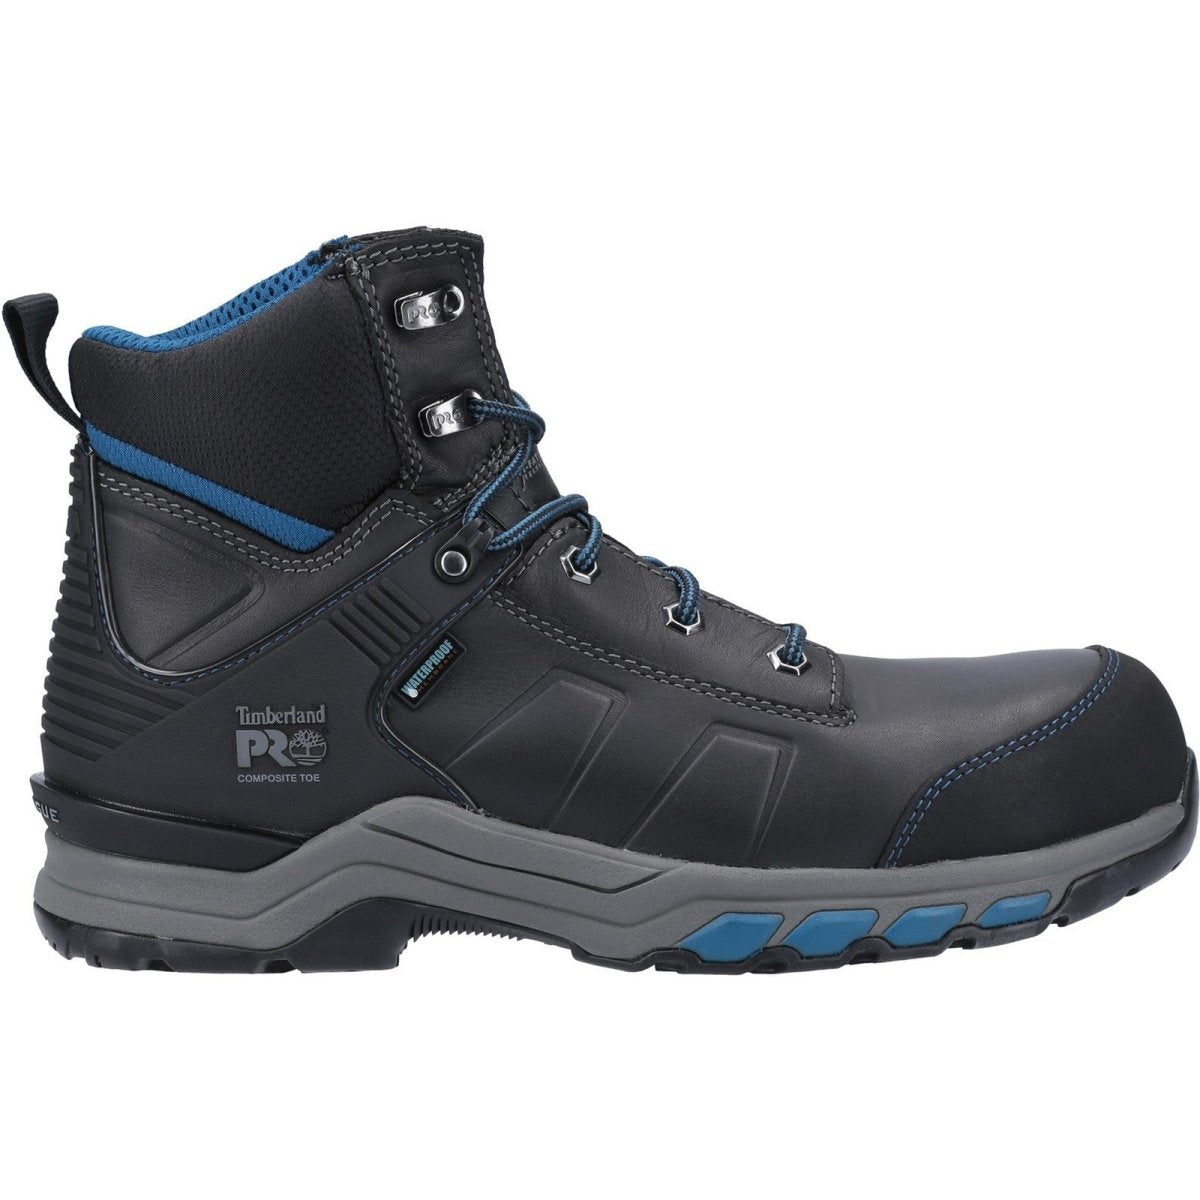 Timberland Pro Hypercharge Composite Safety Toe Work Boot - Shoe Store Direct